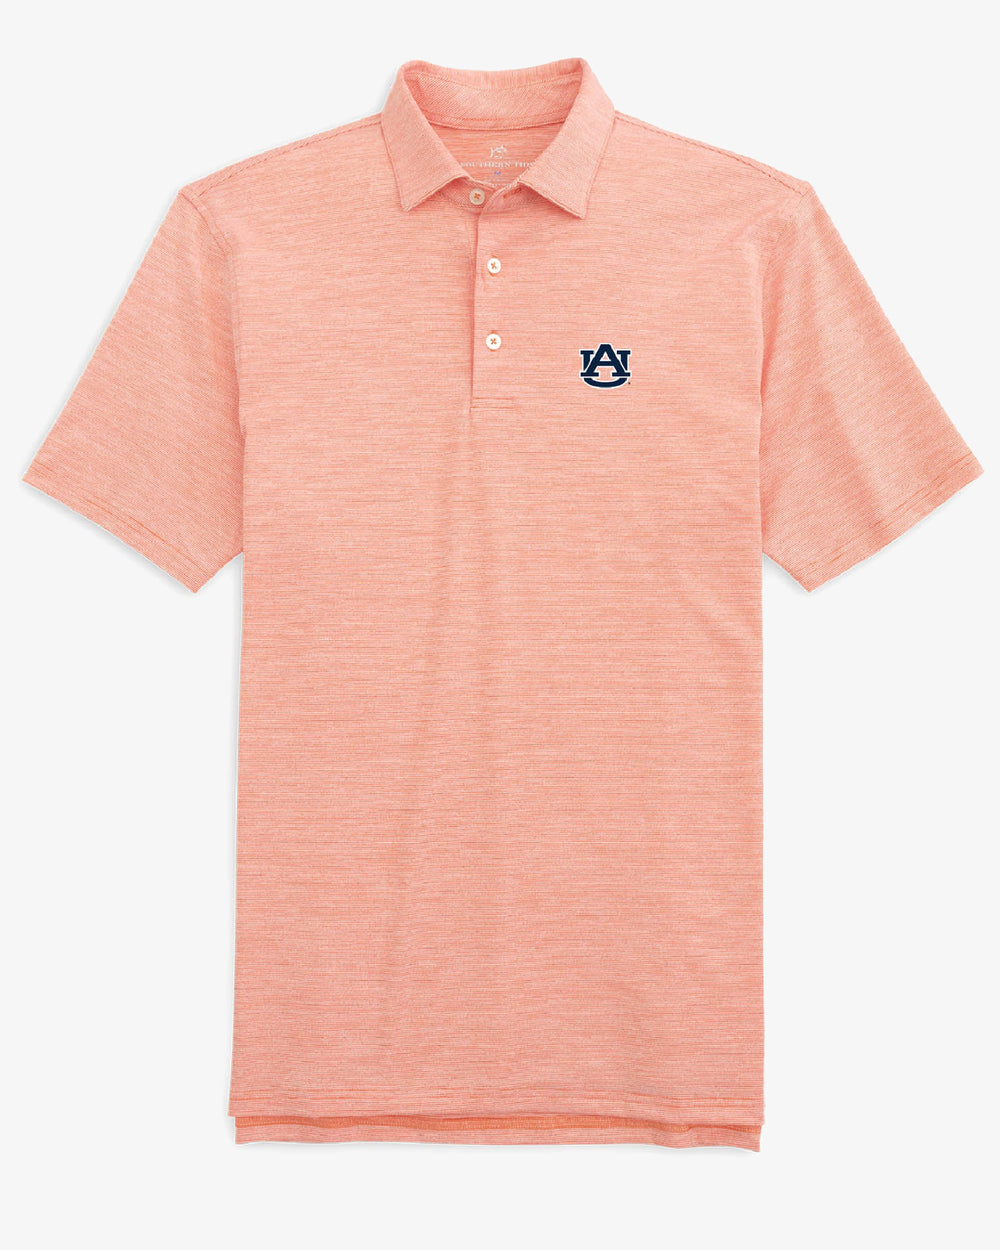 The front view of the Auburn Tigers Driver Spacedye Polo Shirt by Southern Tide - Endzone Orange